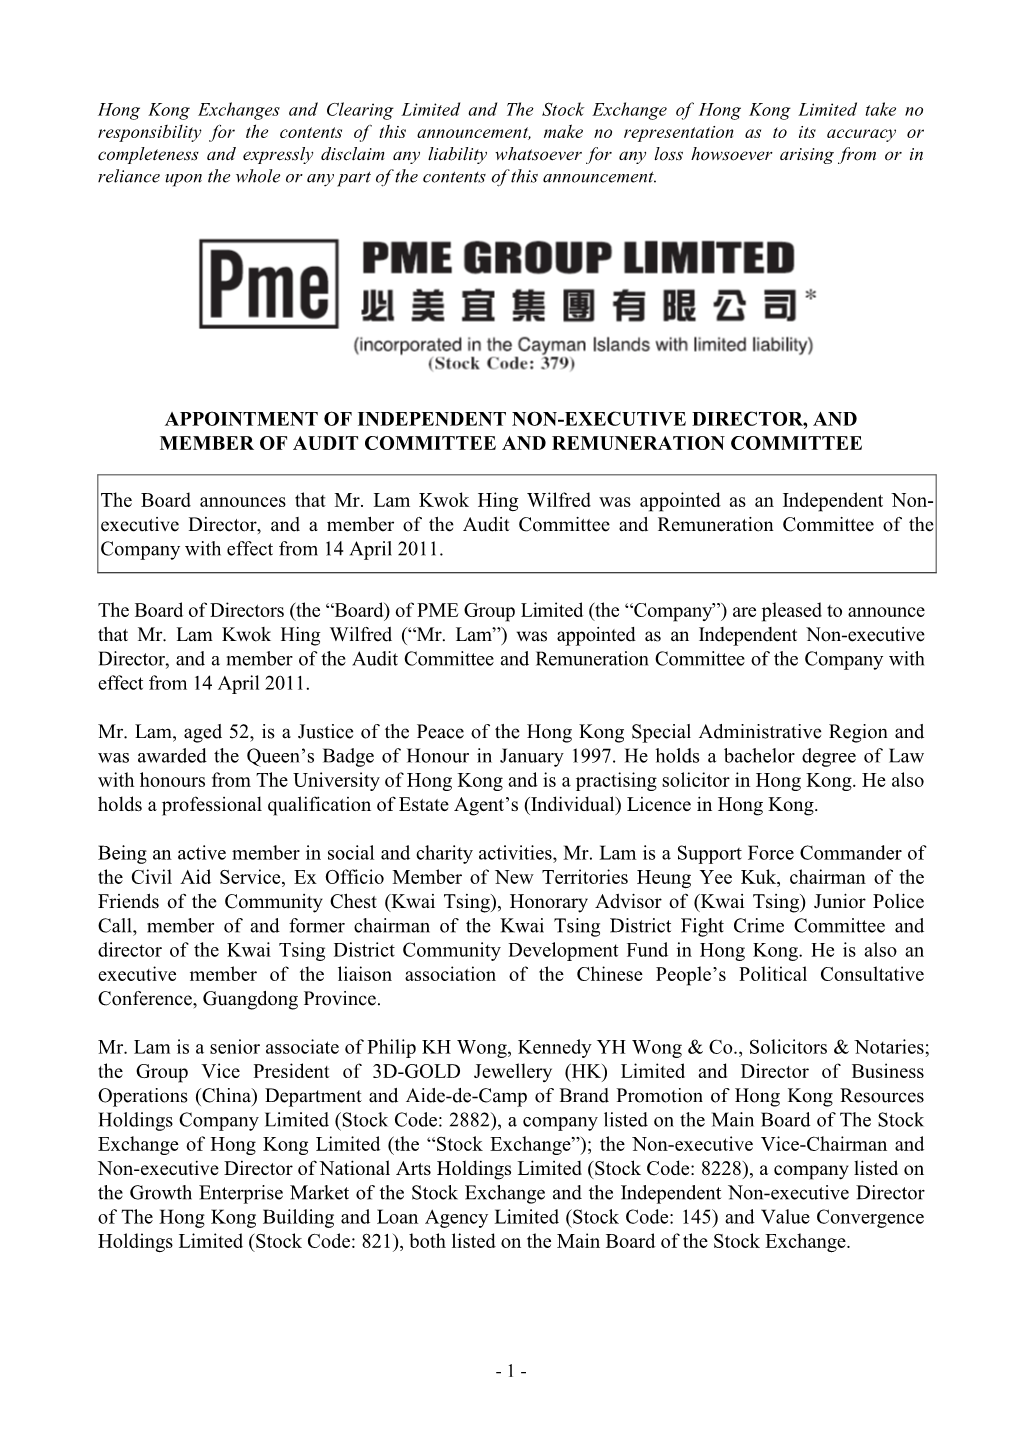 Appointment of Independent Non-Executive Director, and Member of Audit Committee and Remuneration Committee